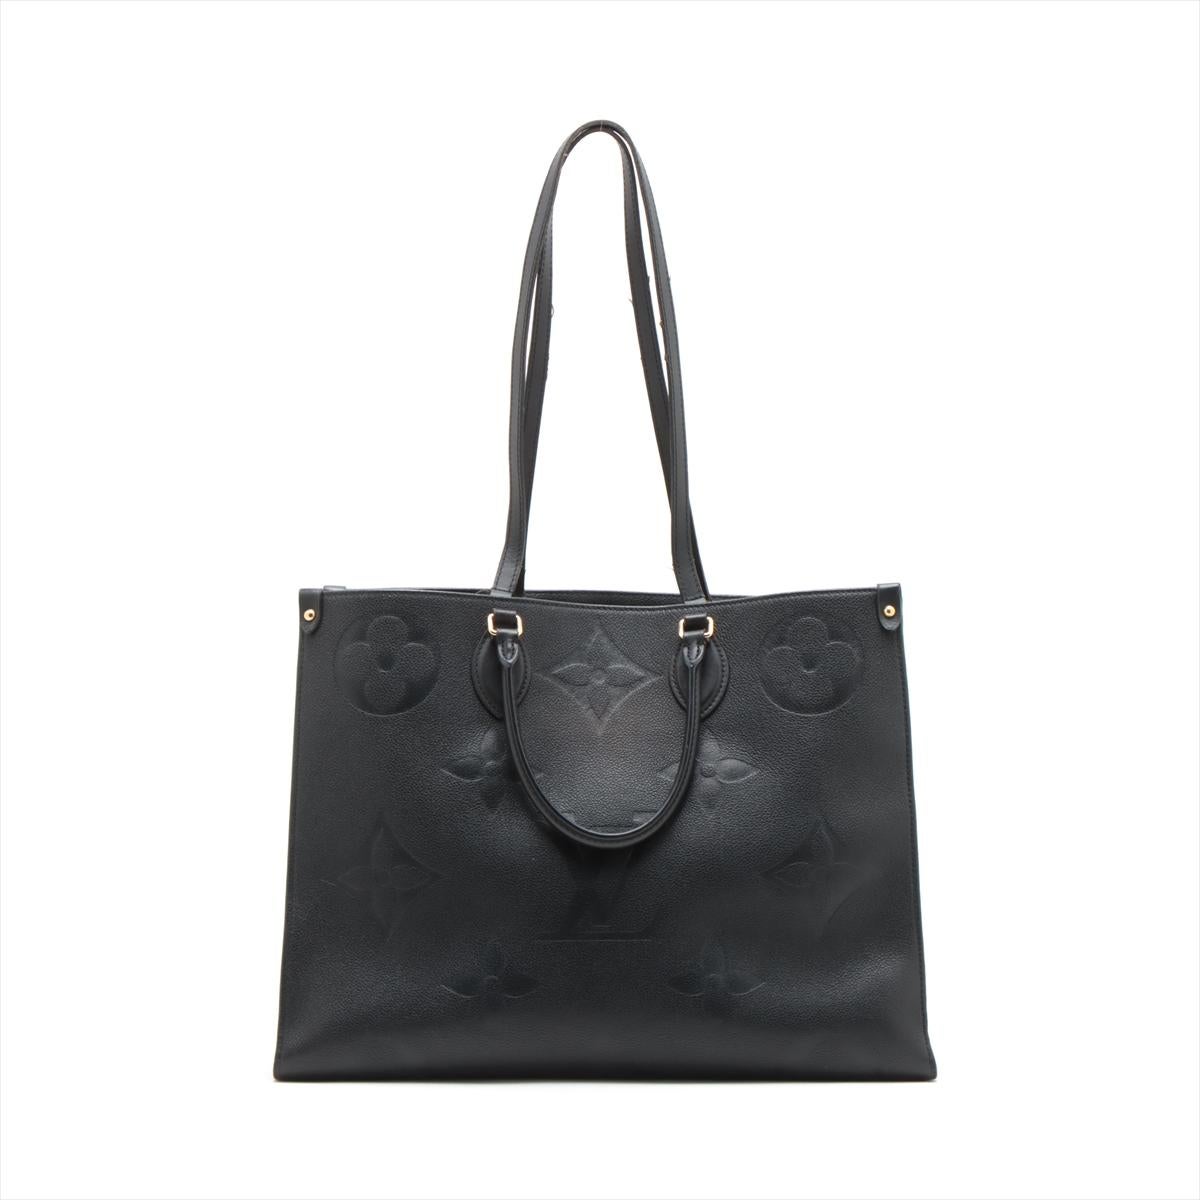 The Louis Vuitton Monogram Empreinte On the Go GM in Black is a luxurious and spacious tote bag that epitomizes modern elegance and sophistication.The bag features Louis Vuitton's iconic Monogram Empreinte leather, known for its supple texture and